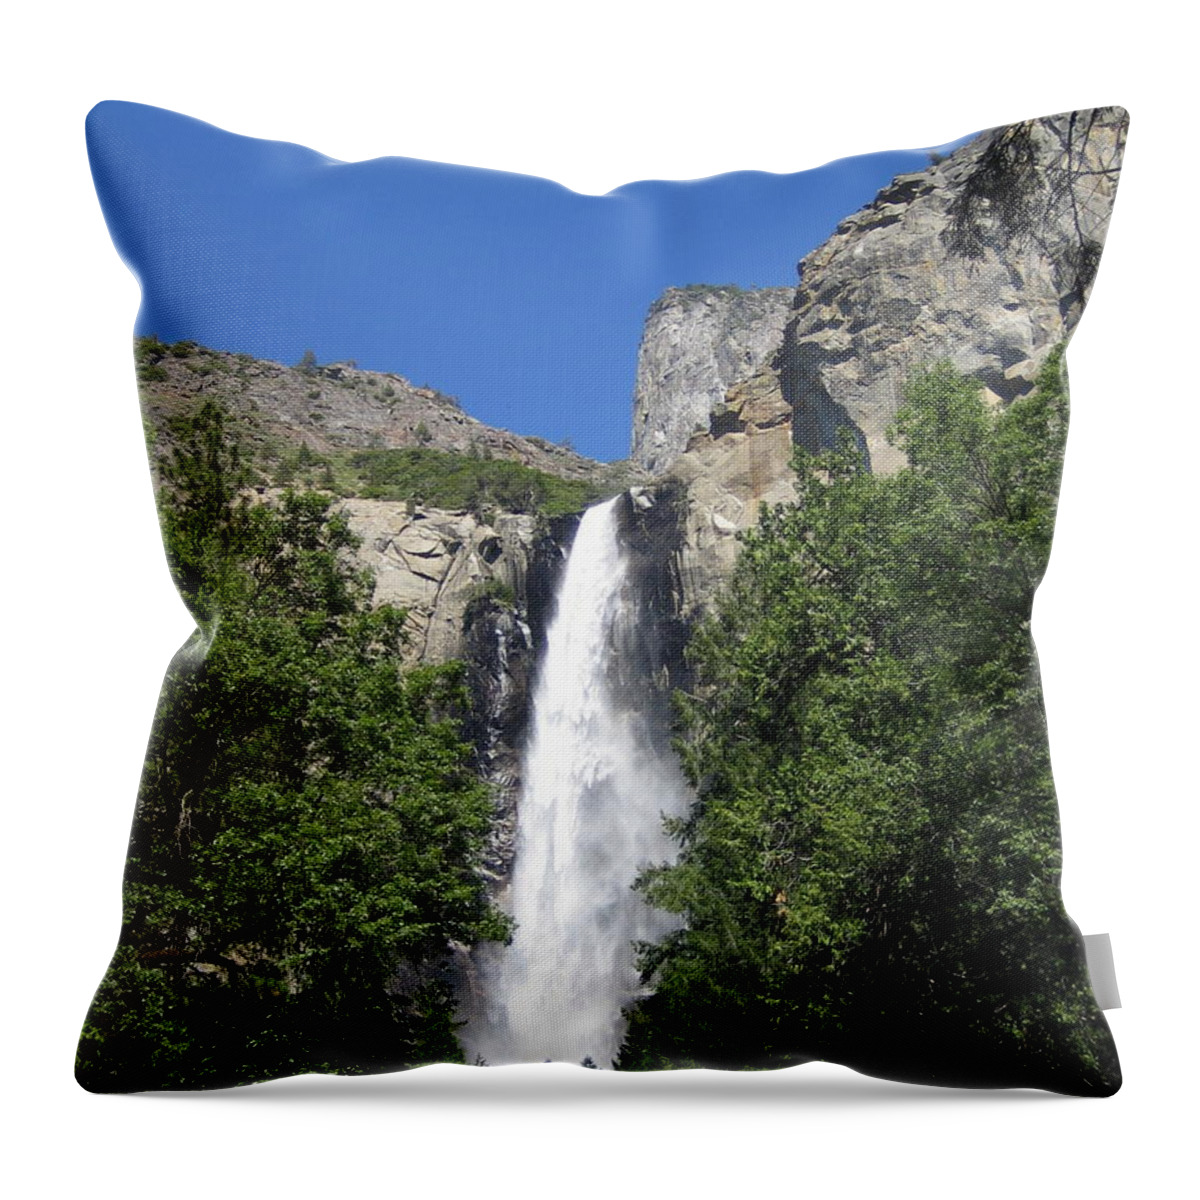 Yosemite Throw Pillow featuring the photograph Yosemite National Park Bridal Veil Falls Water Fall Blast on a Blue Sky Day by John Shiron